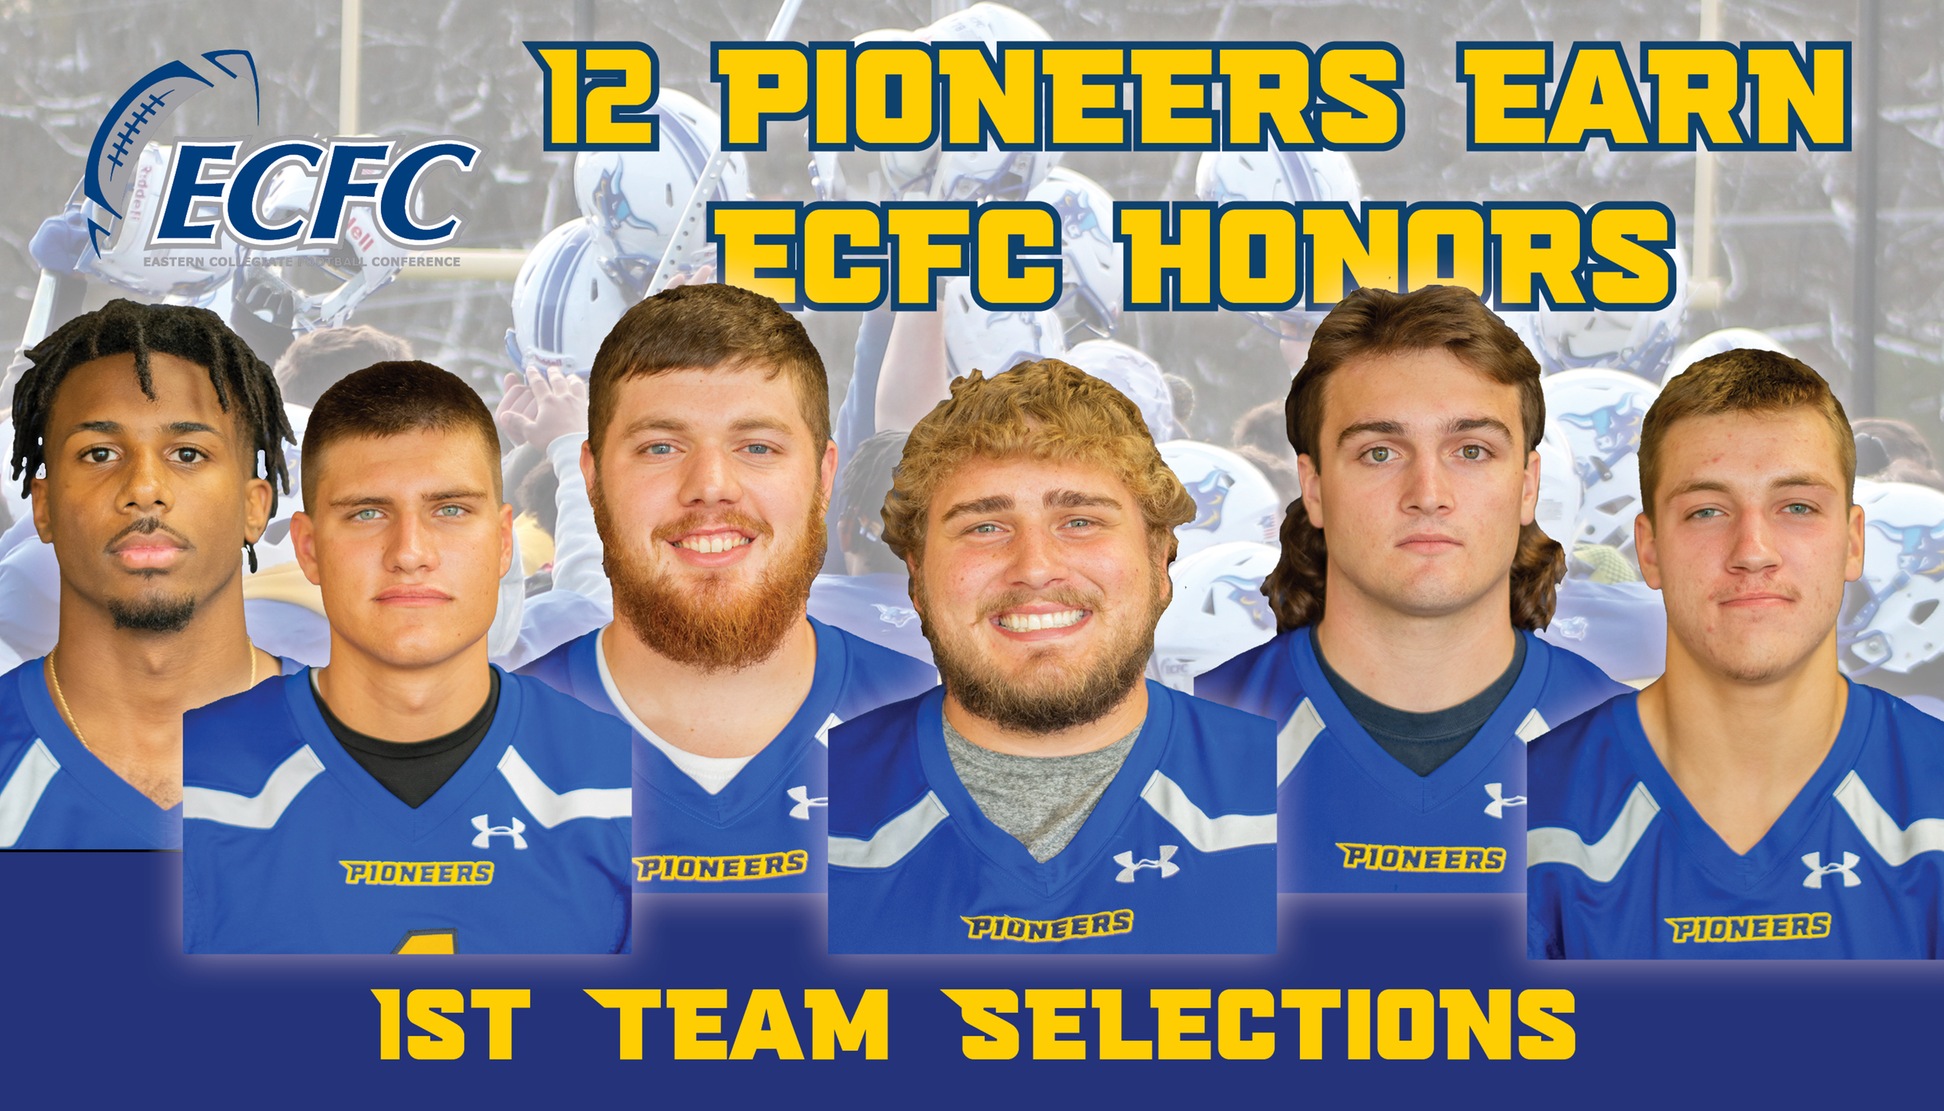 2019 Alfred State All ECFC 1st team selecions